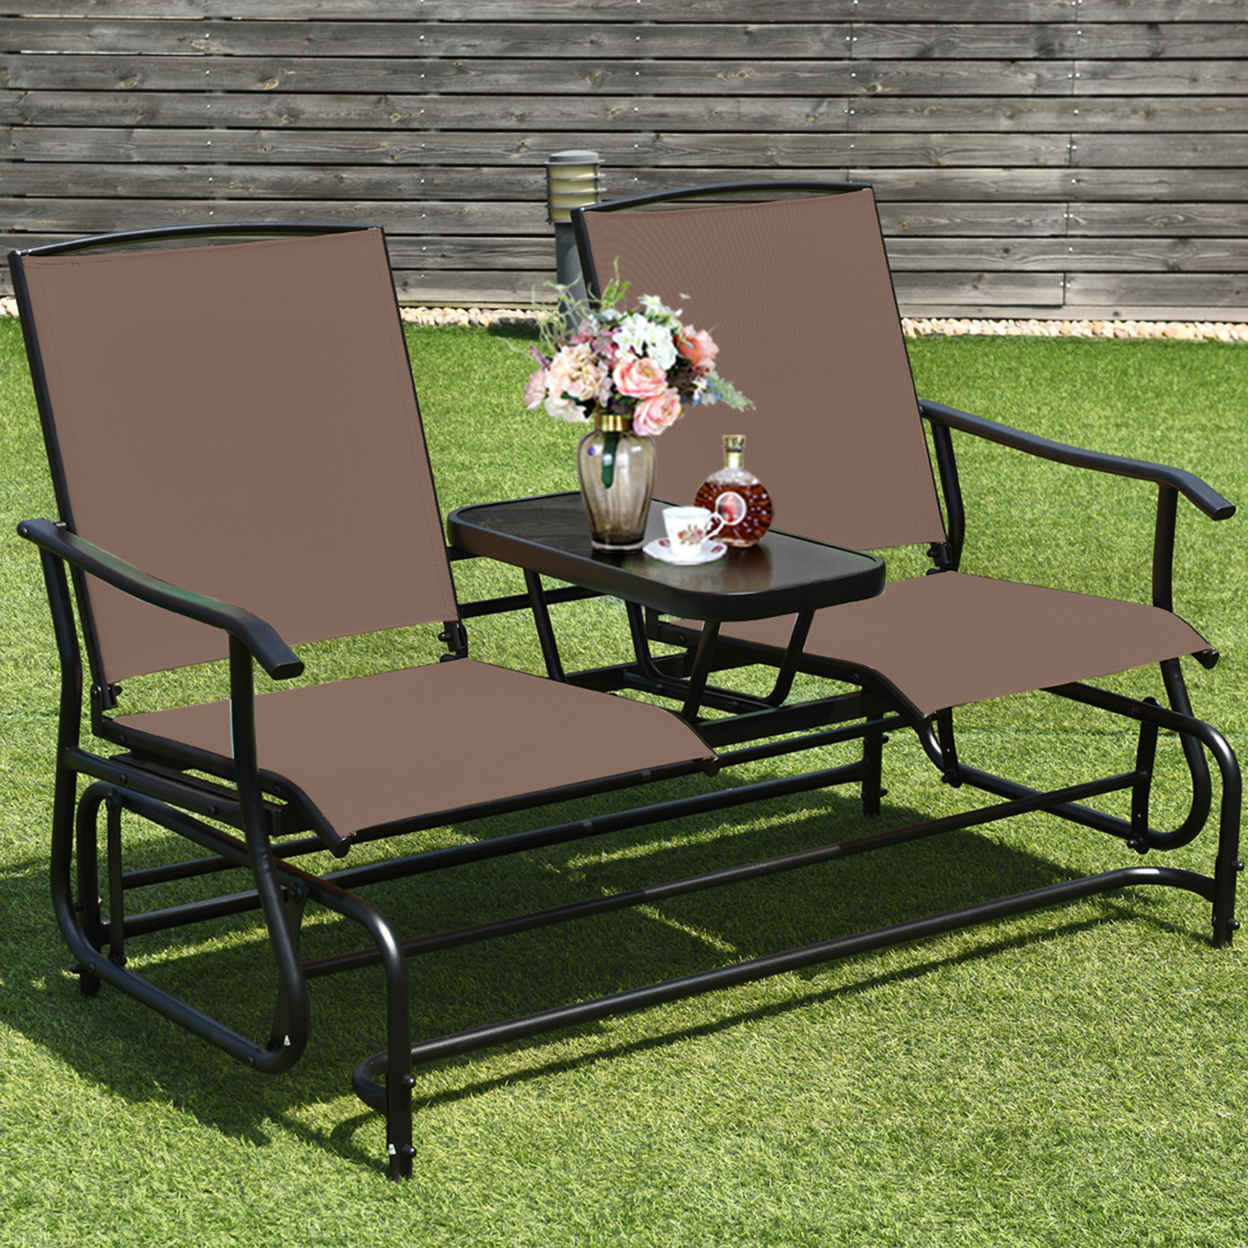 Patio 2-Person Glider Rocking Char Loveseat Garden W/ Tempered Glass Table Brown